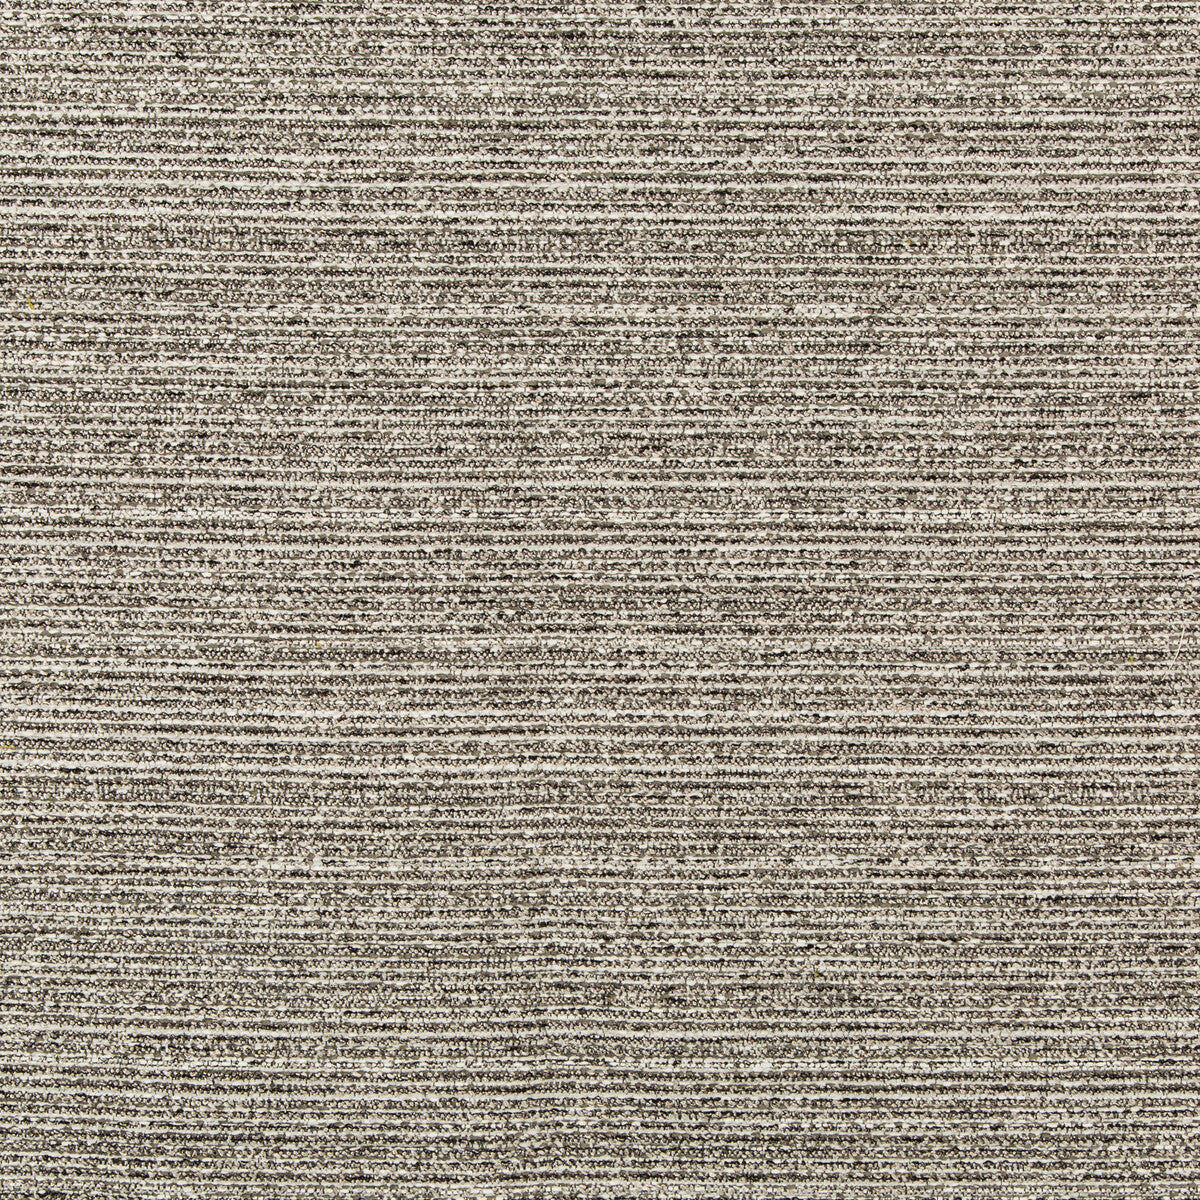 Kravet Design fabric in 36079-21 color - pattern 36079.21.0 - by Kravet Design in the Inside Out Performance Fabrics collection